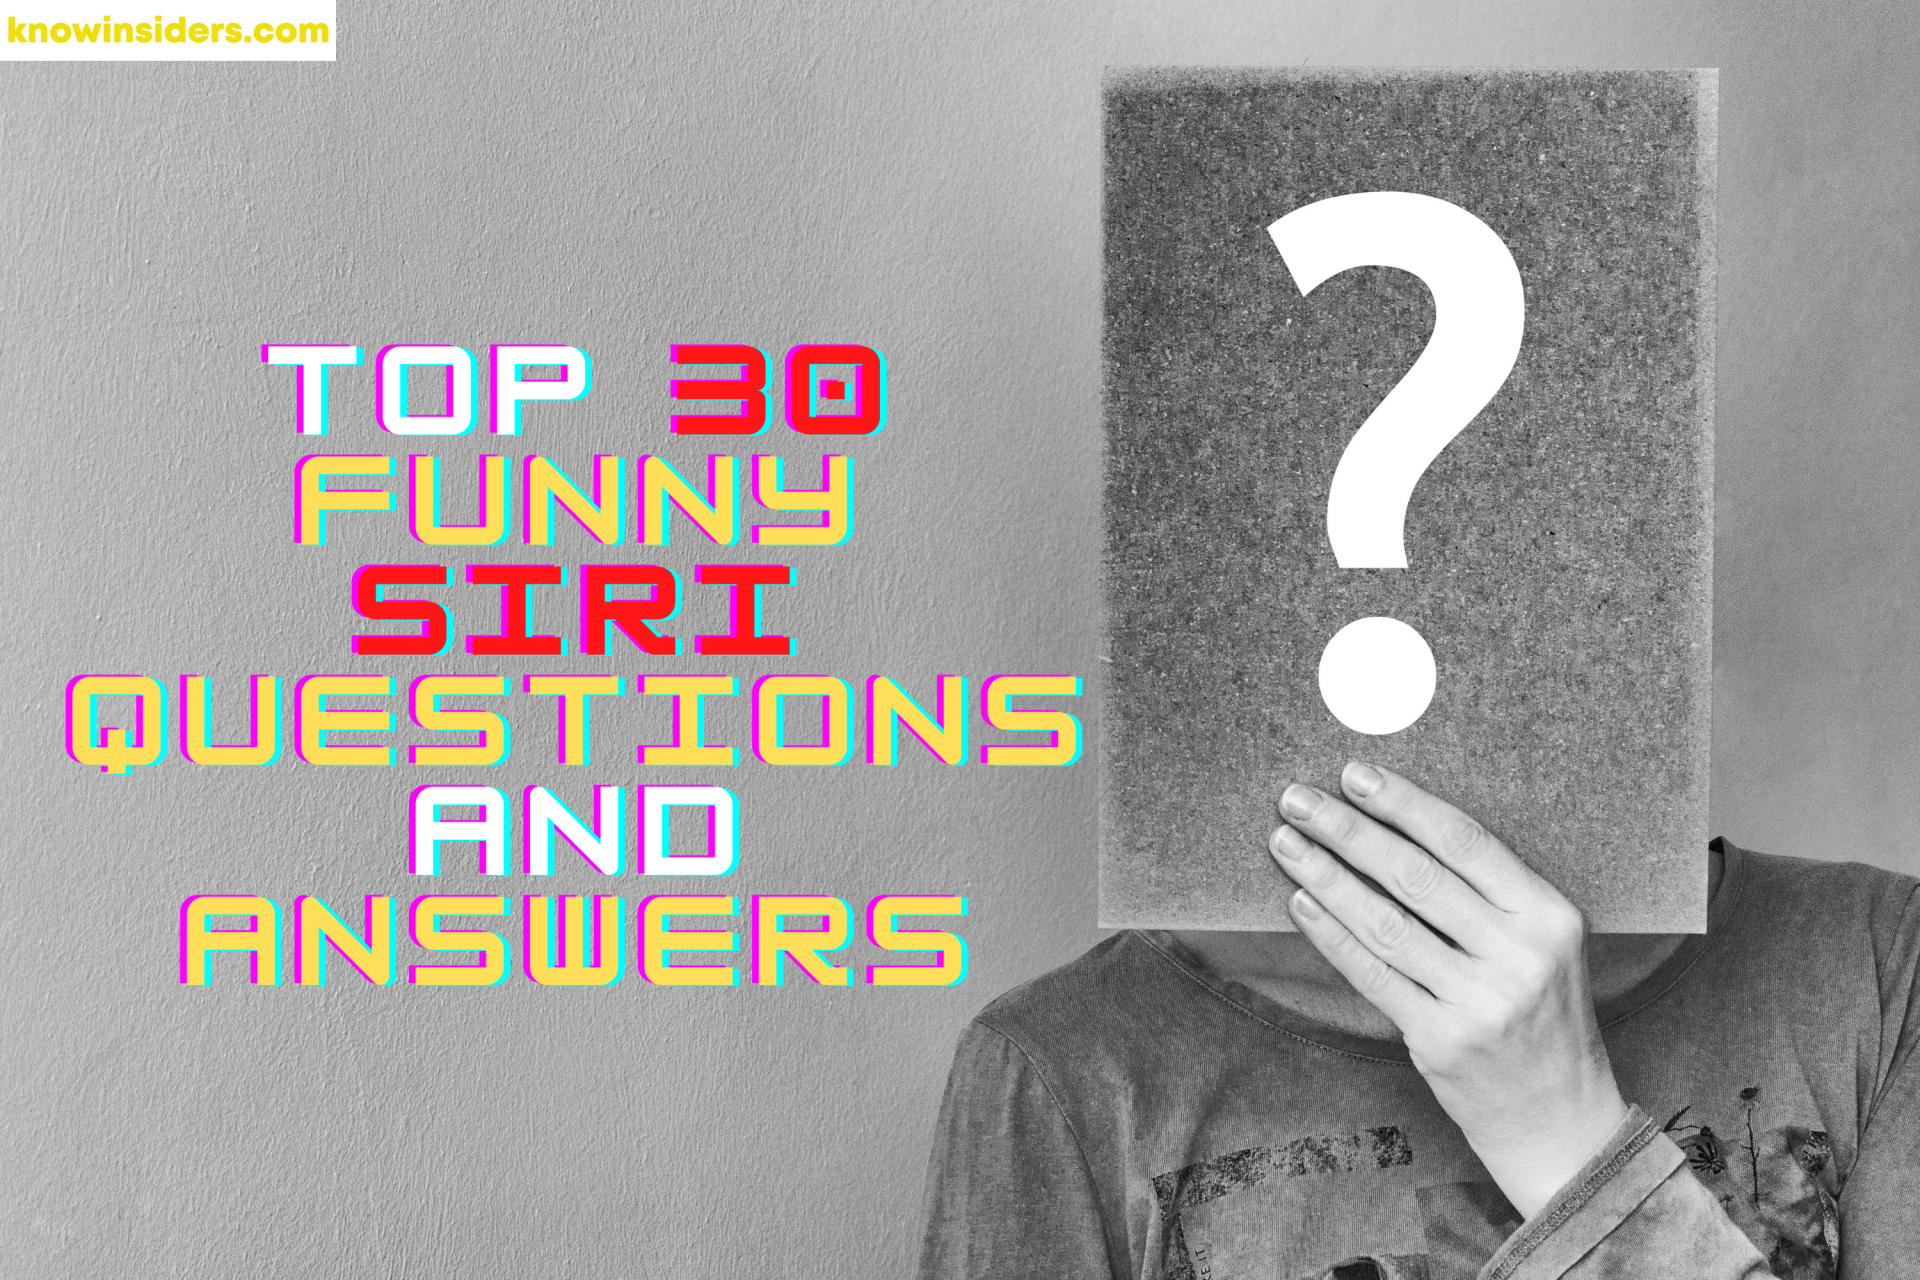 Top 30 Funny Siri Questions and Answers